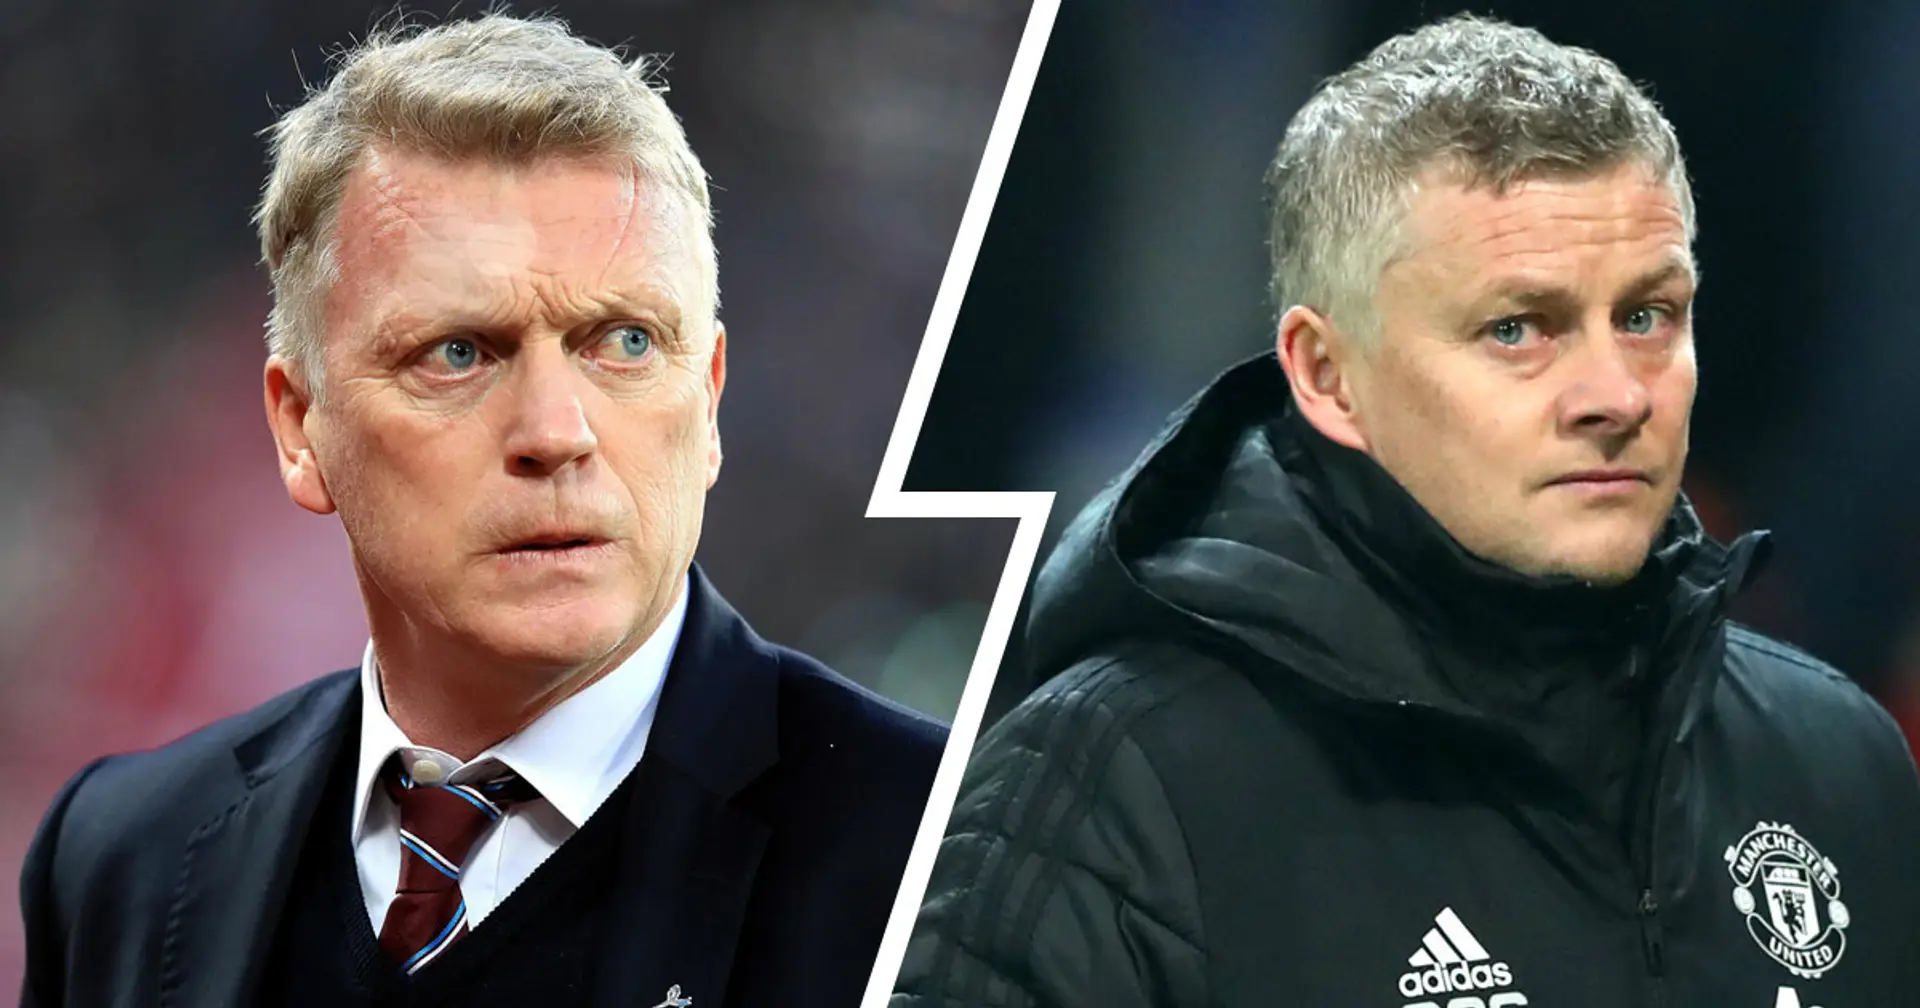 ‘You can’t feel sorry for someone who has managed Man United’: Solskjaer refuses to sympathize with David Moyes for failed Old Trafford spell